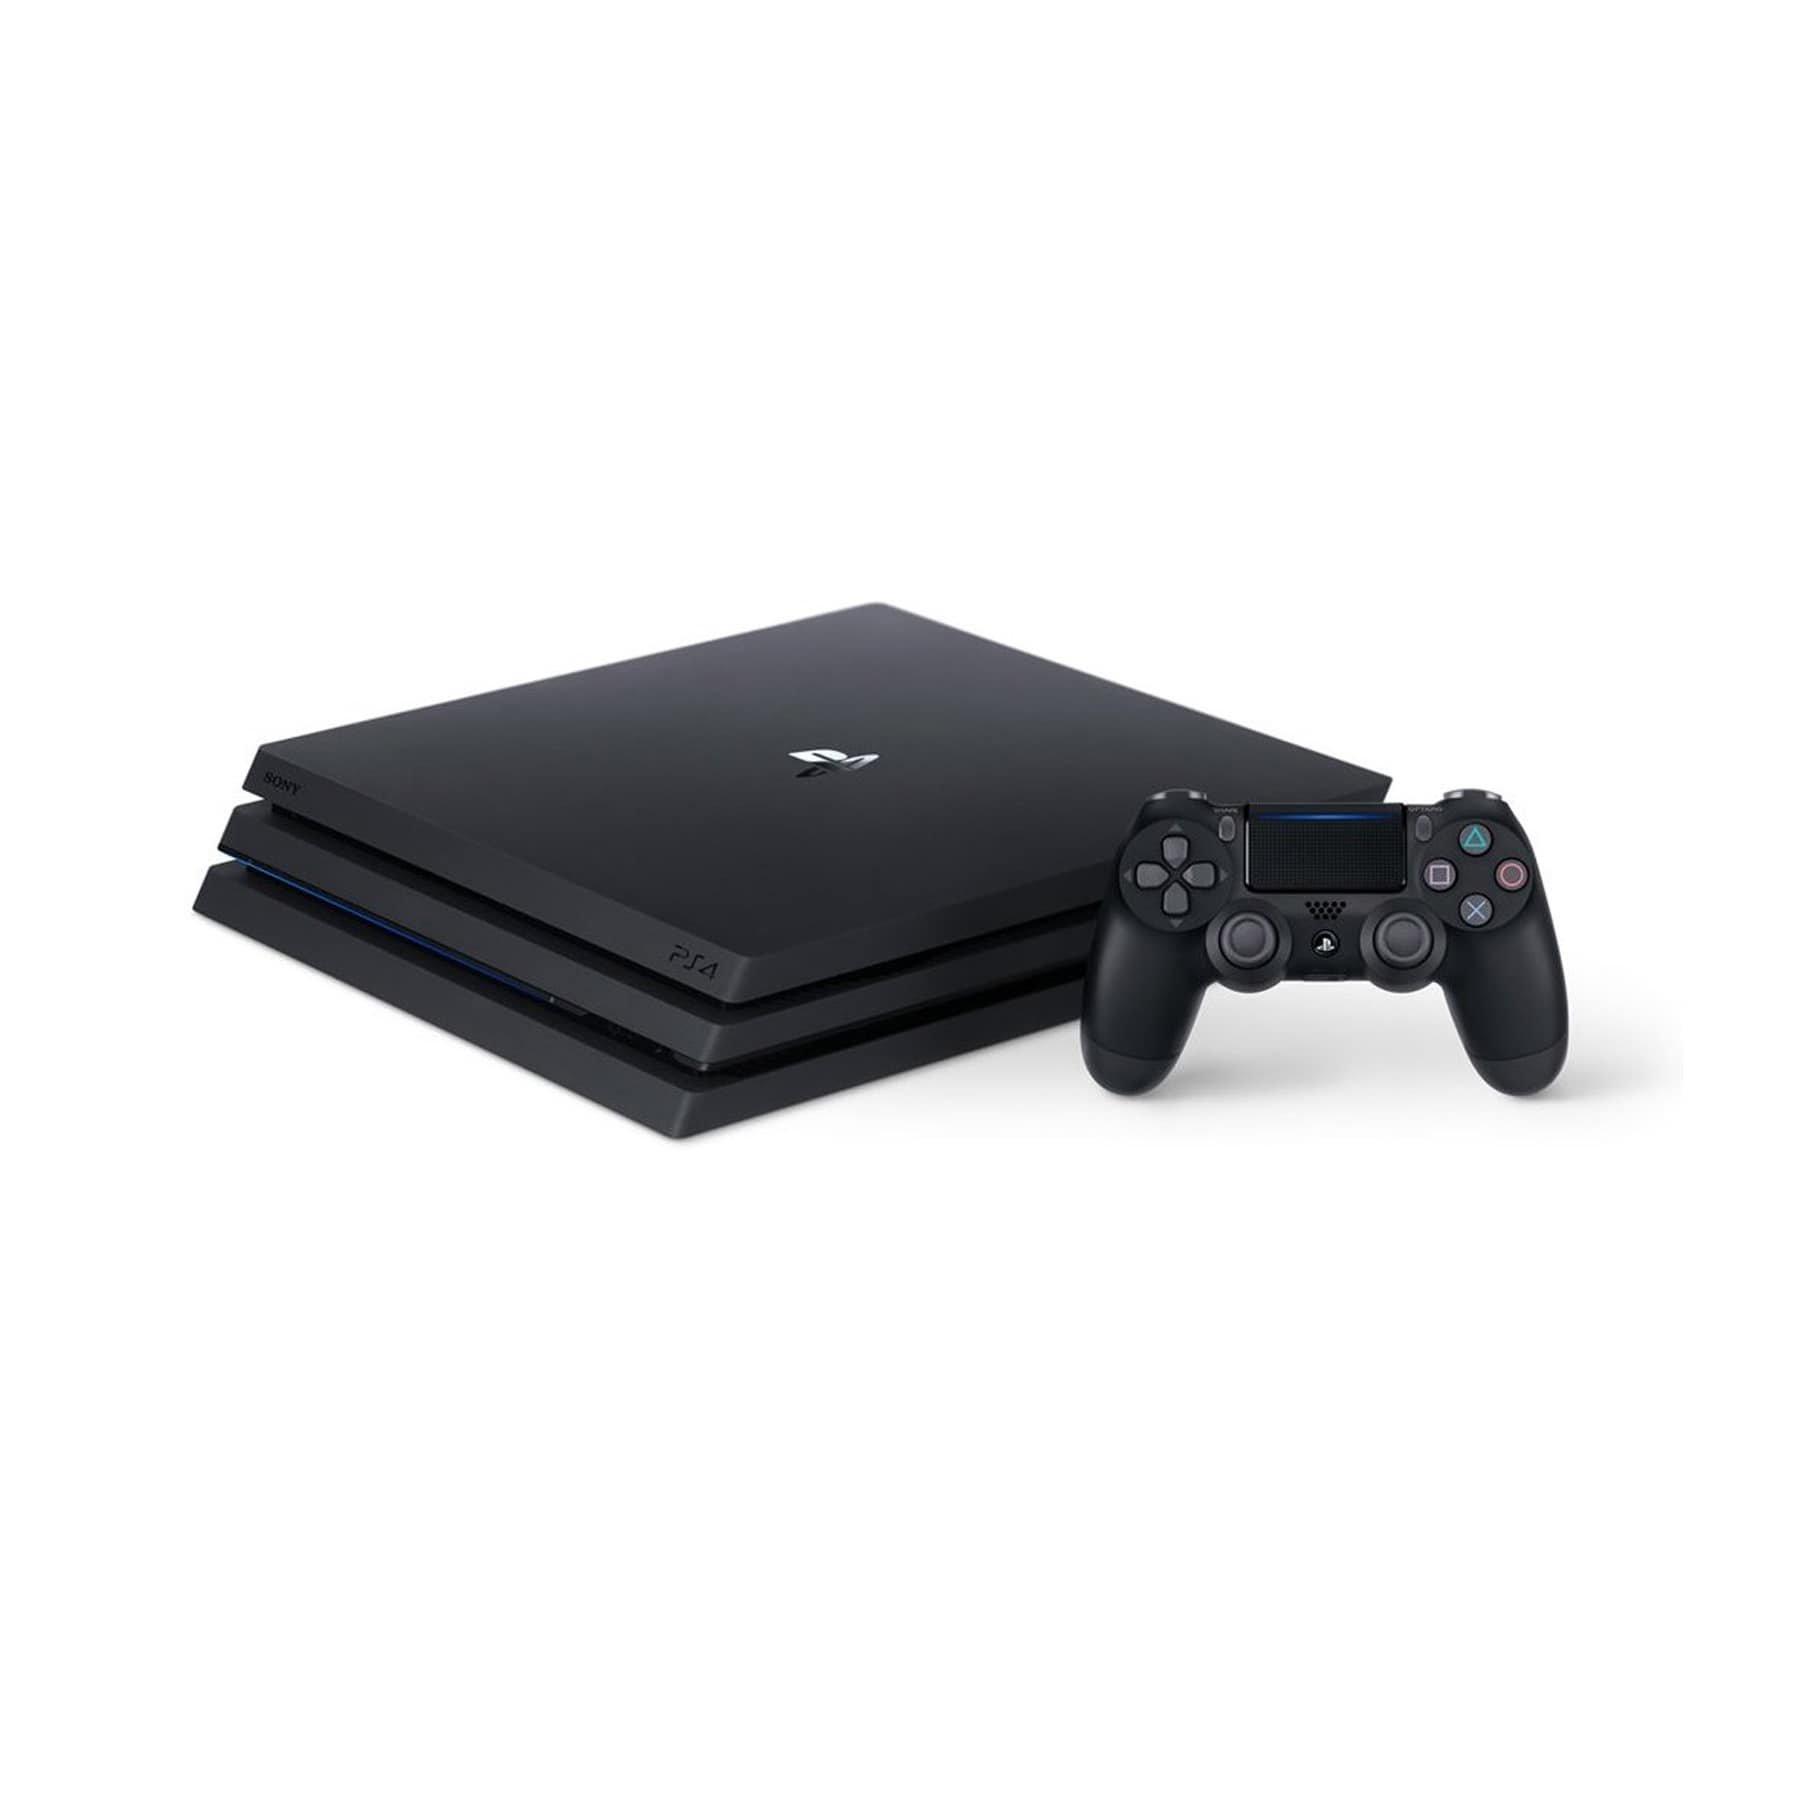 ps4 pro home credit